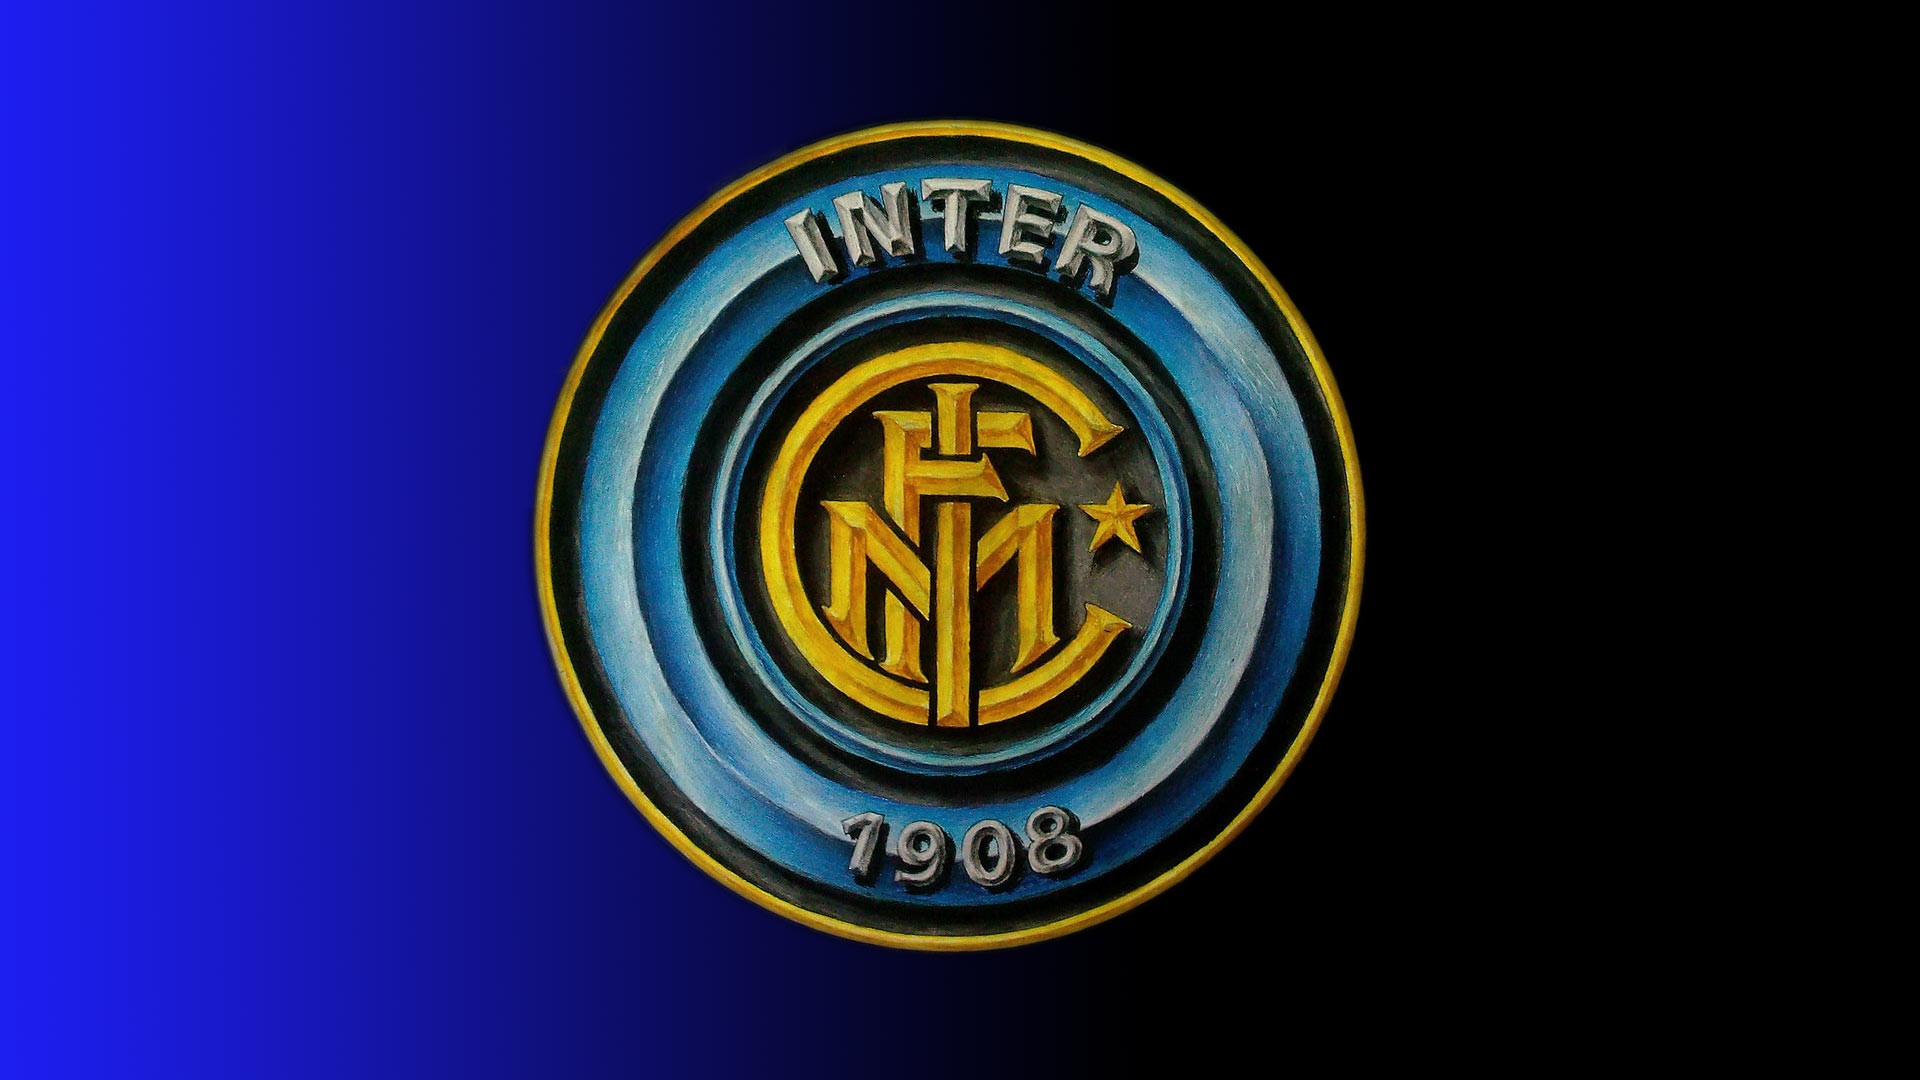 Inter, Soccer Clubs, Italy, Soccer, Sports Wallpaper